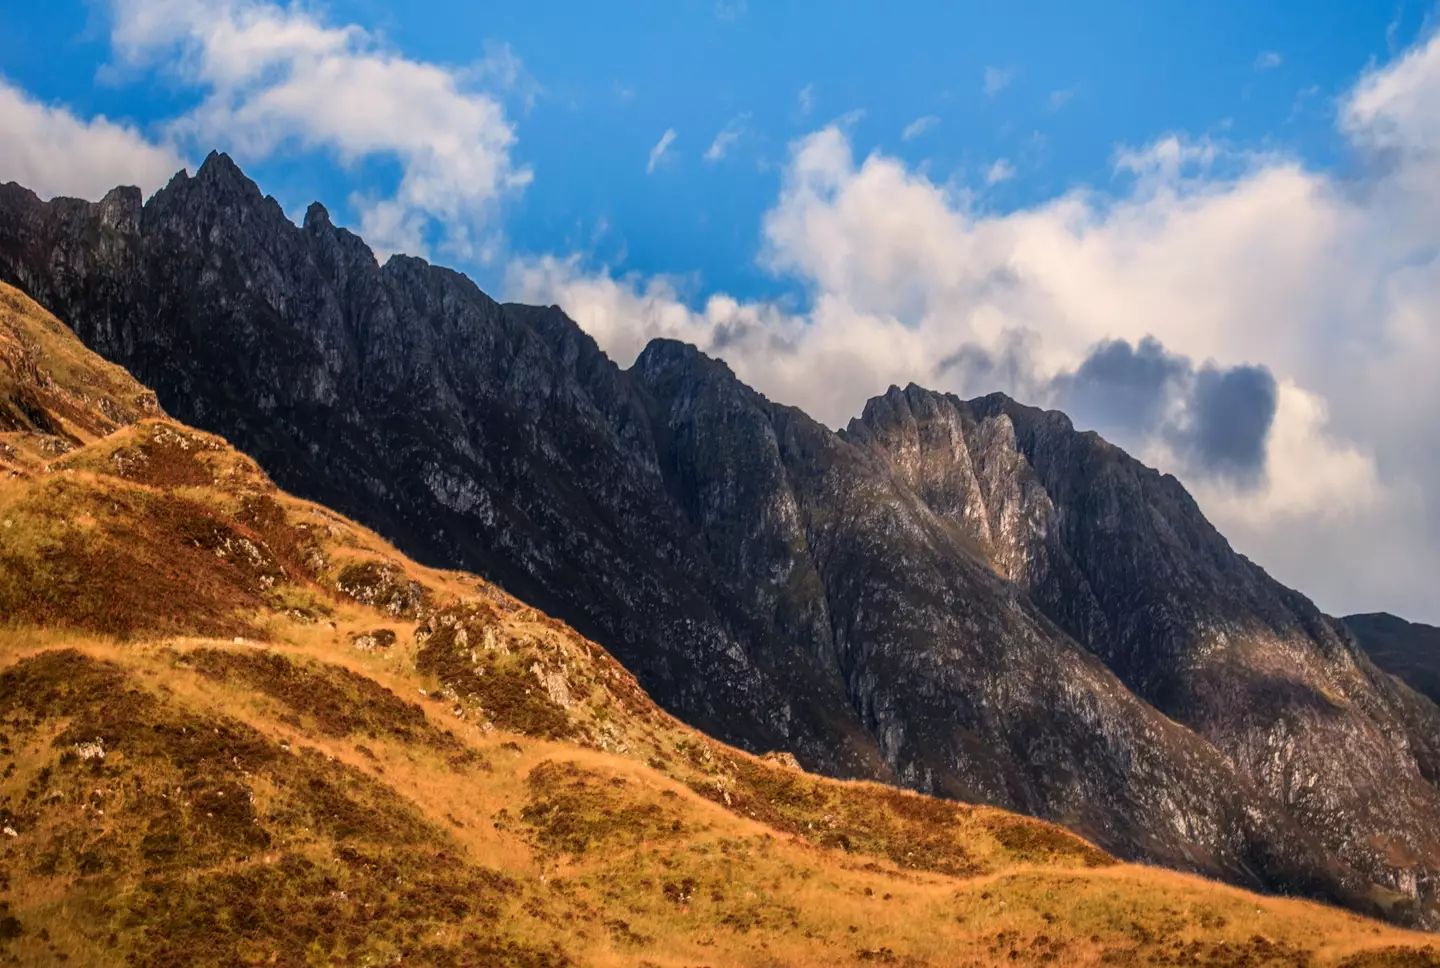 Aonach Eagach ridge is said to be the narrowest on the British mainland.